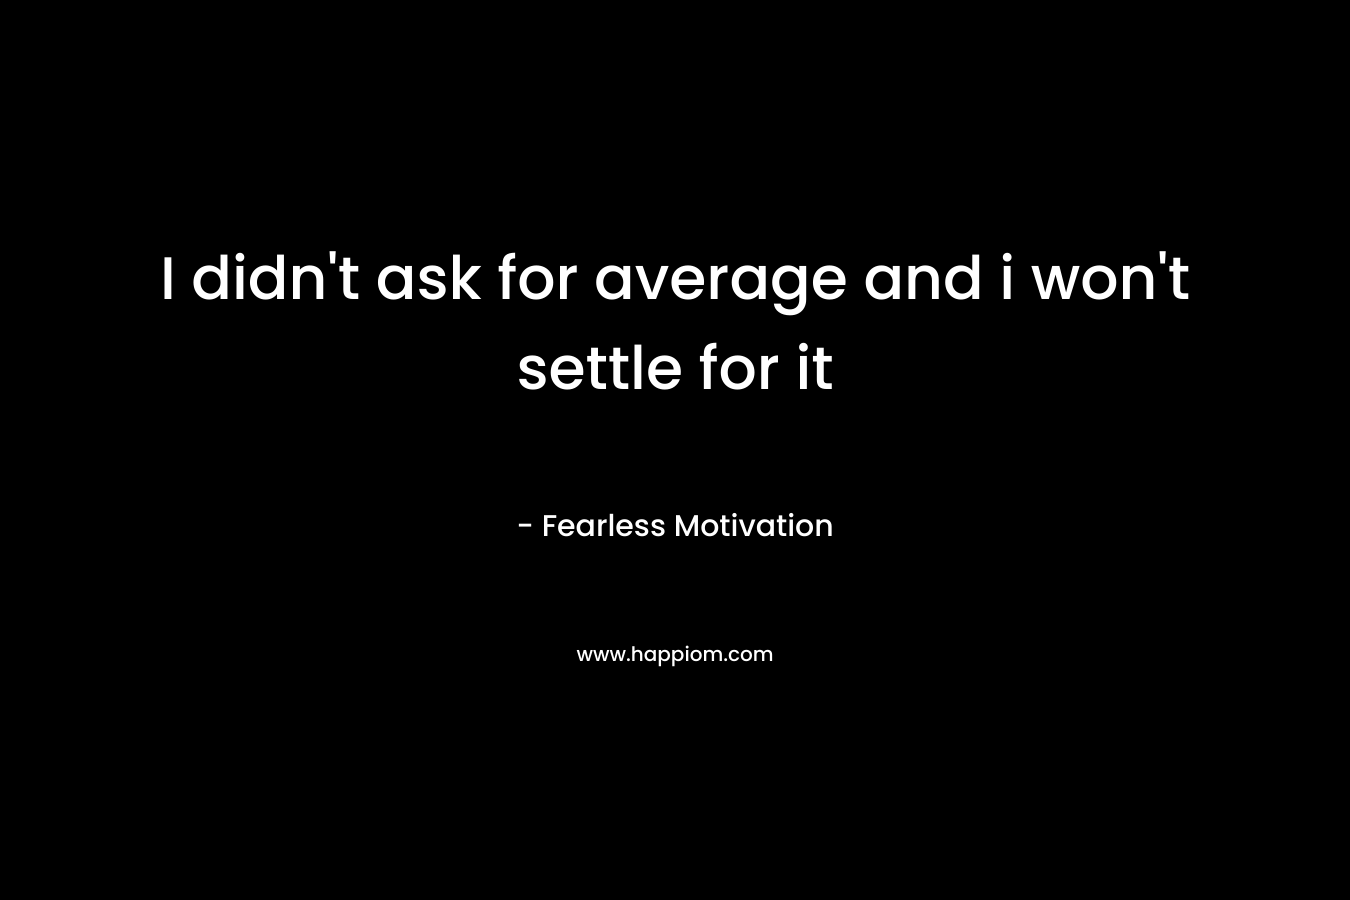 I didn't ask for average and i won't settle for it